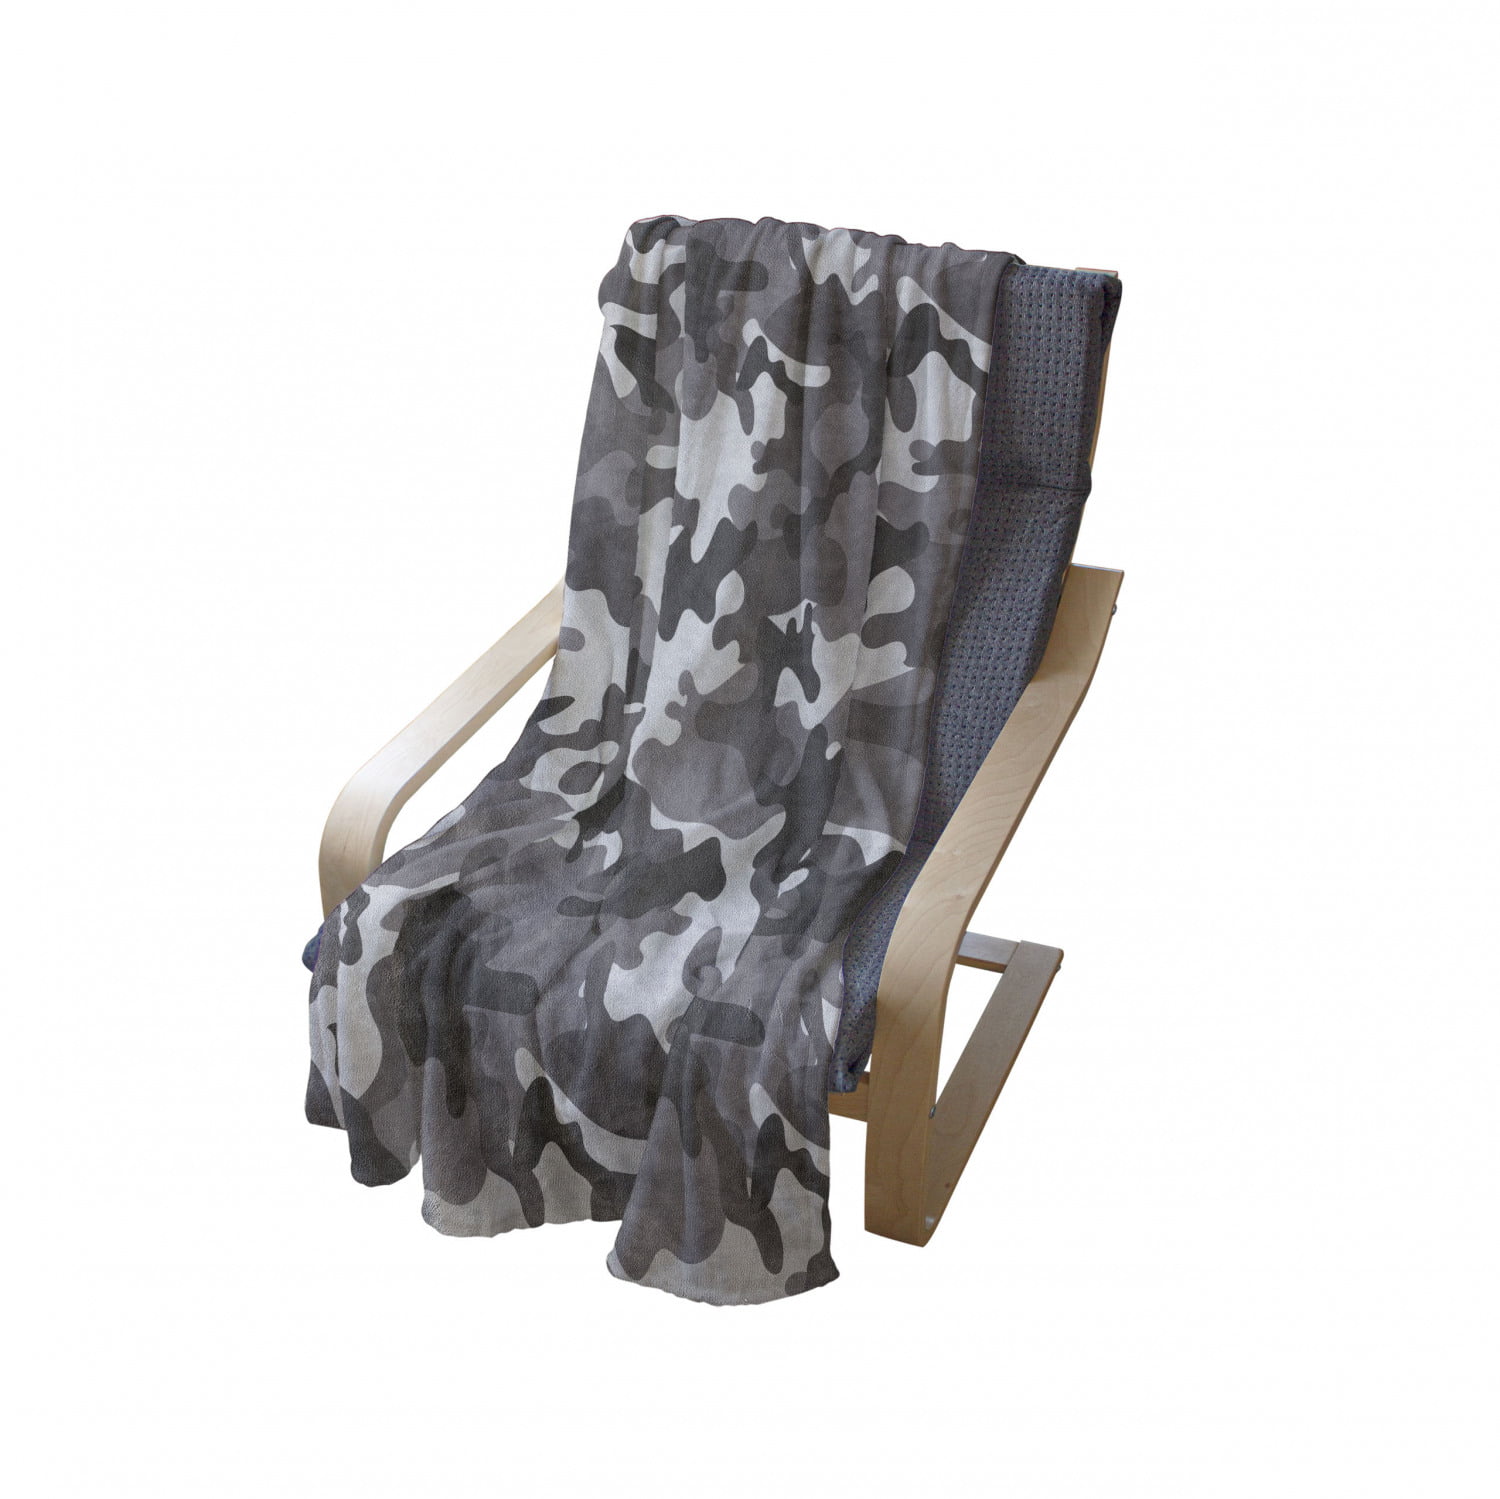 Monochrome Attire Pattern Camouflage Inside Vegetation Fashion Design Print Grey Coconut Ambesonne Camouflage Soft Flannel Fleece Throw Blanket Cozy Plush for Indoor and Outdoor Use 60 x 80 